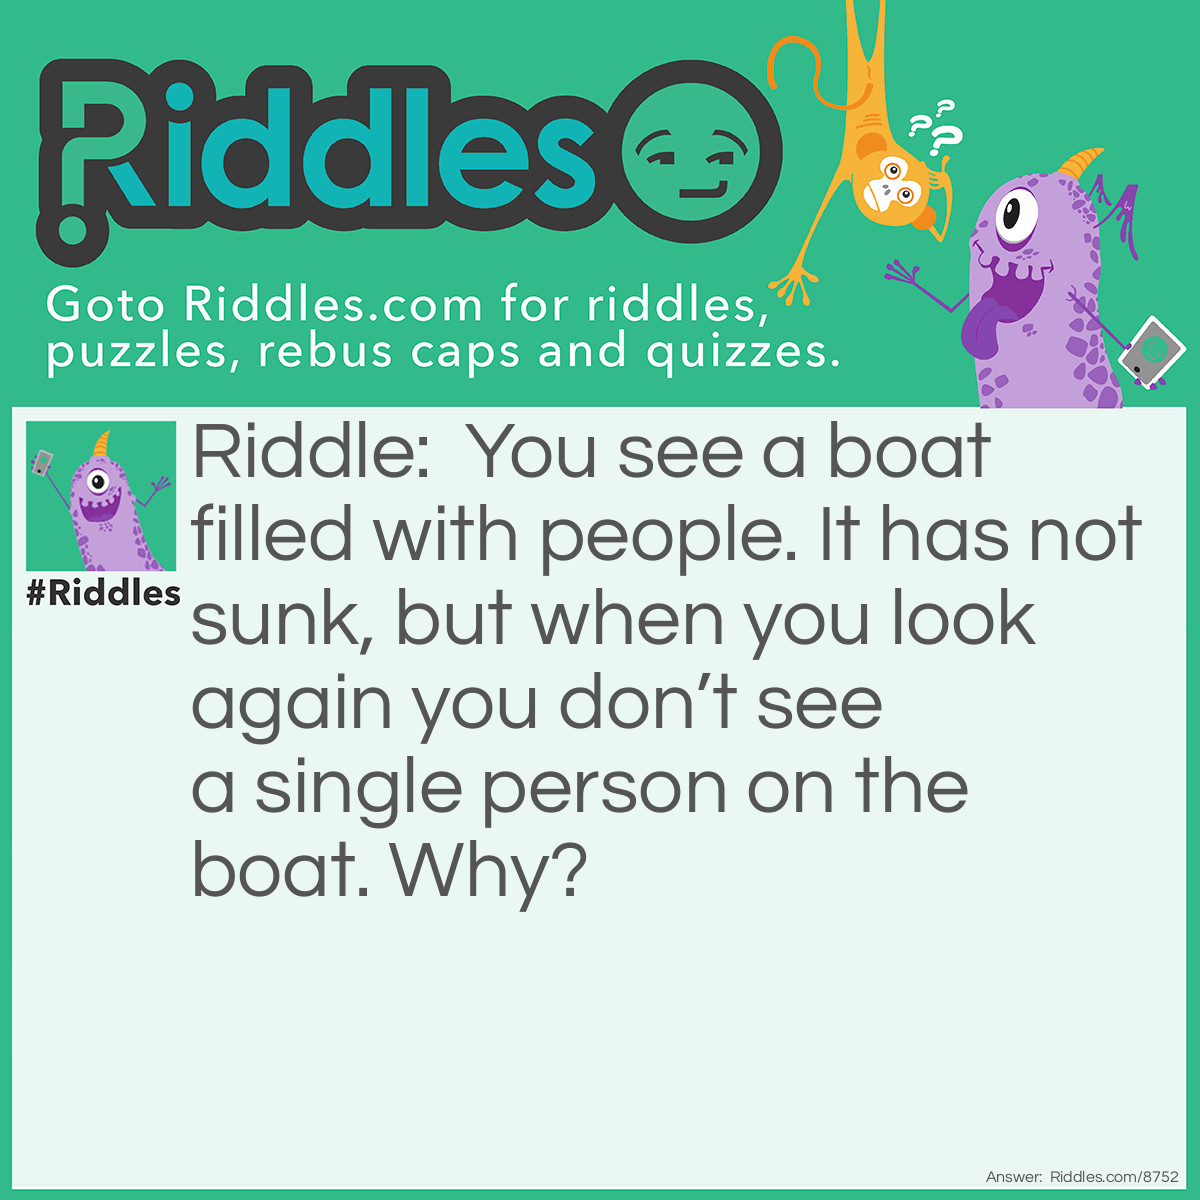 Riddle: You see a boat filled with people. It has not sunk, but when you look again you don't see a single person on the boat. Why? Answer: All the people were married